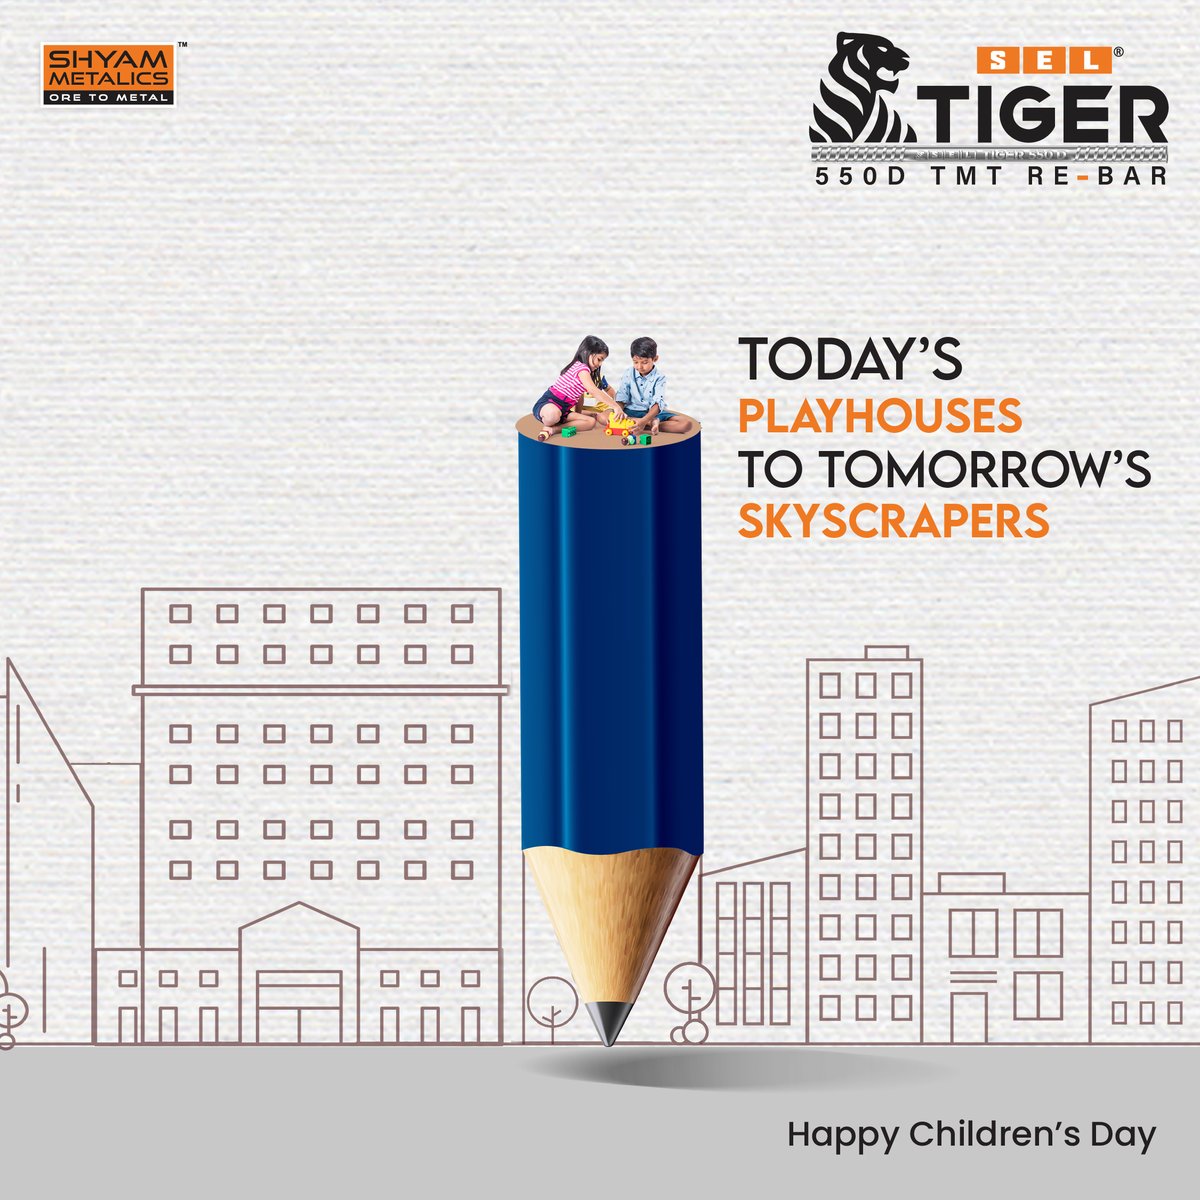 Empowering little dreamers of today for the big achievers of tomorrow. Happy Children's Day. 

#SELTiger #ShyamMetalics #TMTReBars #BuildingRelations #TMTStrength #HappyChildrensDay